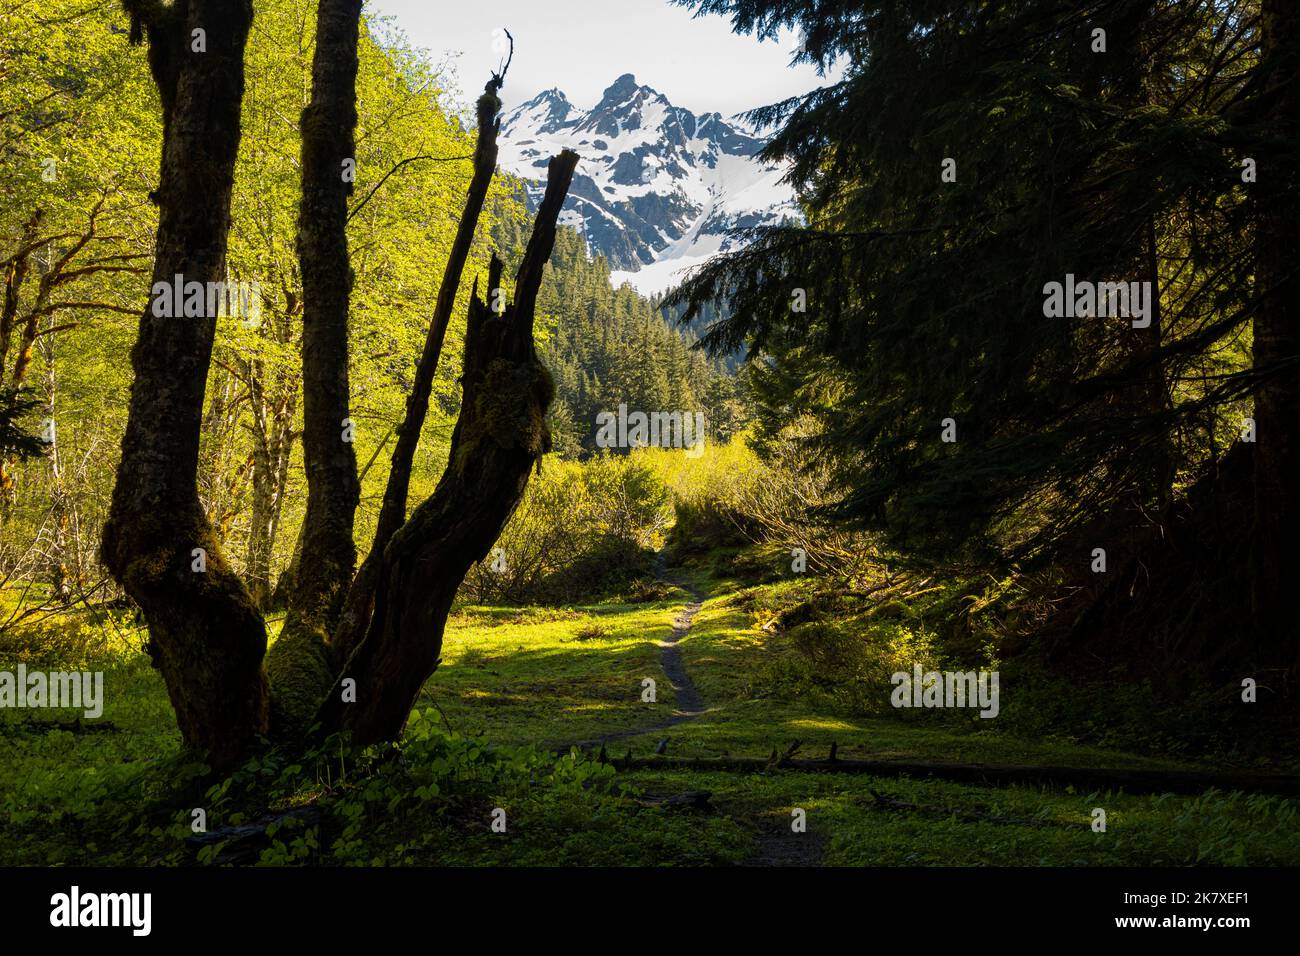 WA22389-00...WASHINGTON - Trail through the Enchanted Valley heading towards Anderson Pass and Mount Anderson in Olympic National Park. Stock Photo